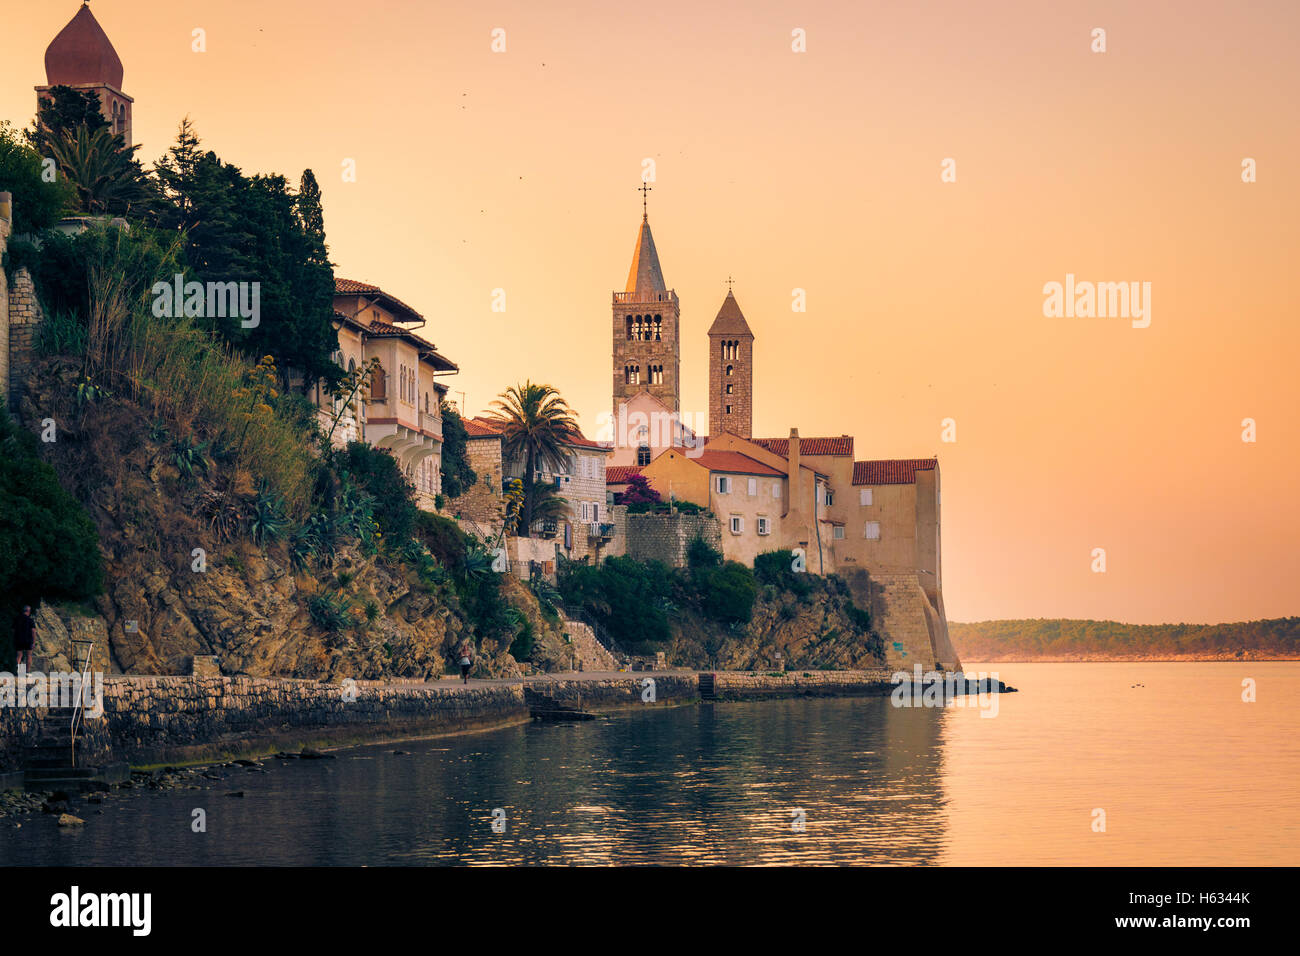 View of the town of Rab, Croatian tourist resort on the homonymous island. Stock Photo